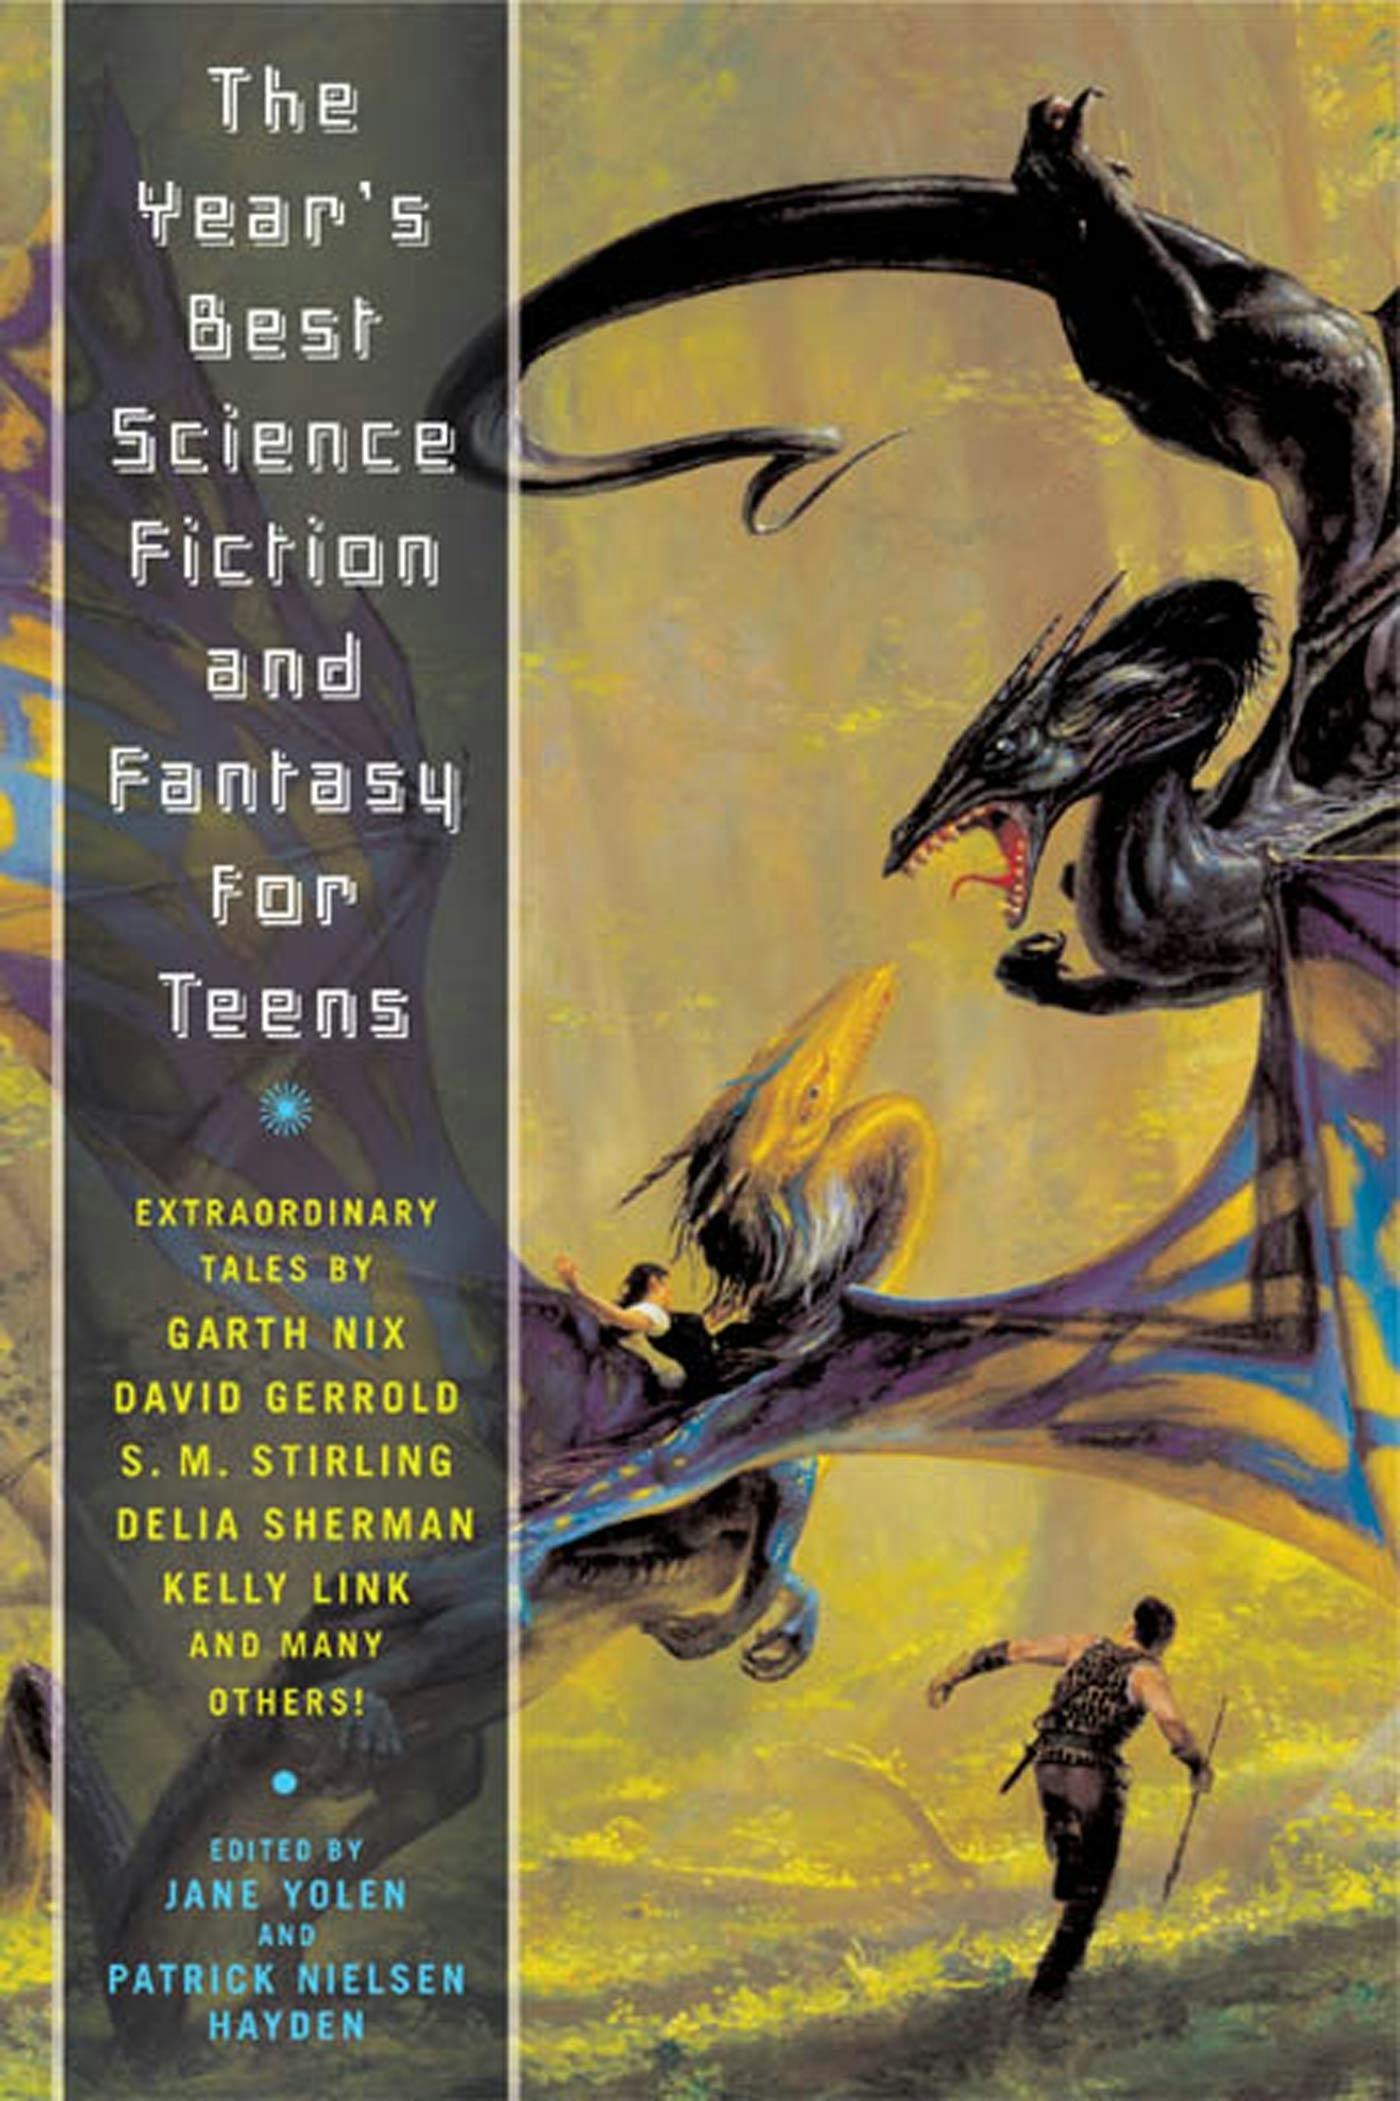 Cover for the book titled as: The Year's Best Science Fiction and Fantasy for Teens